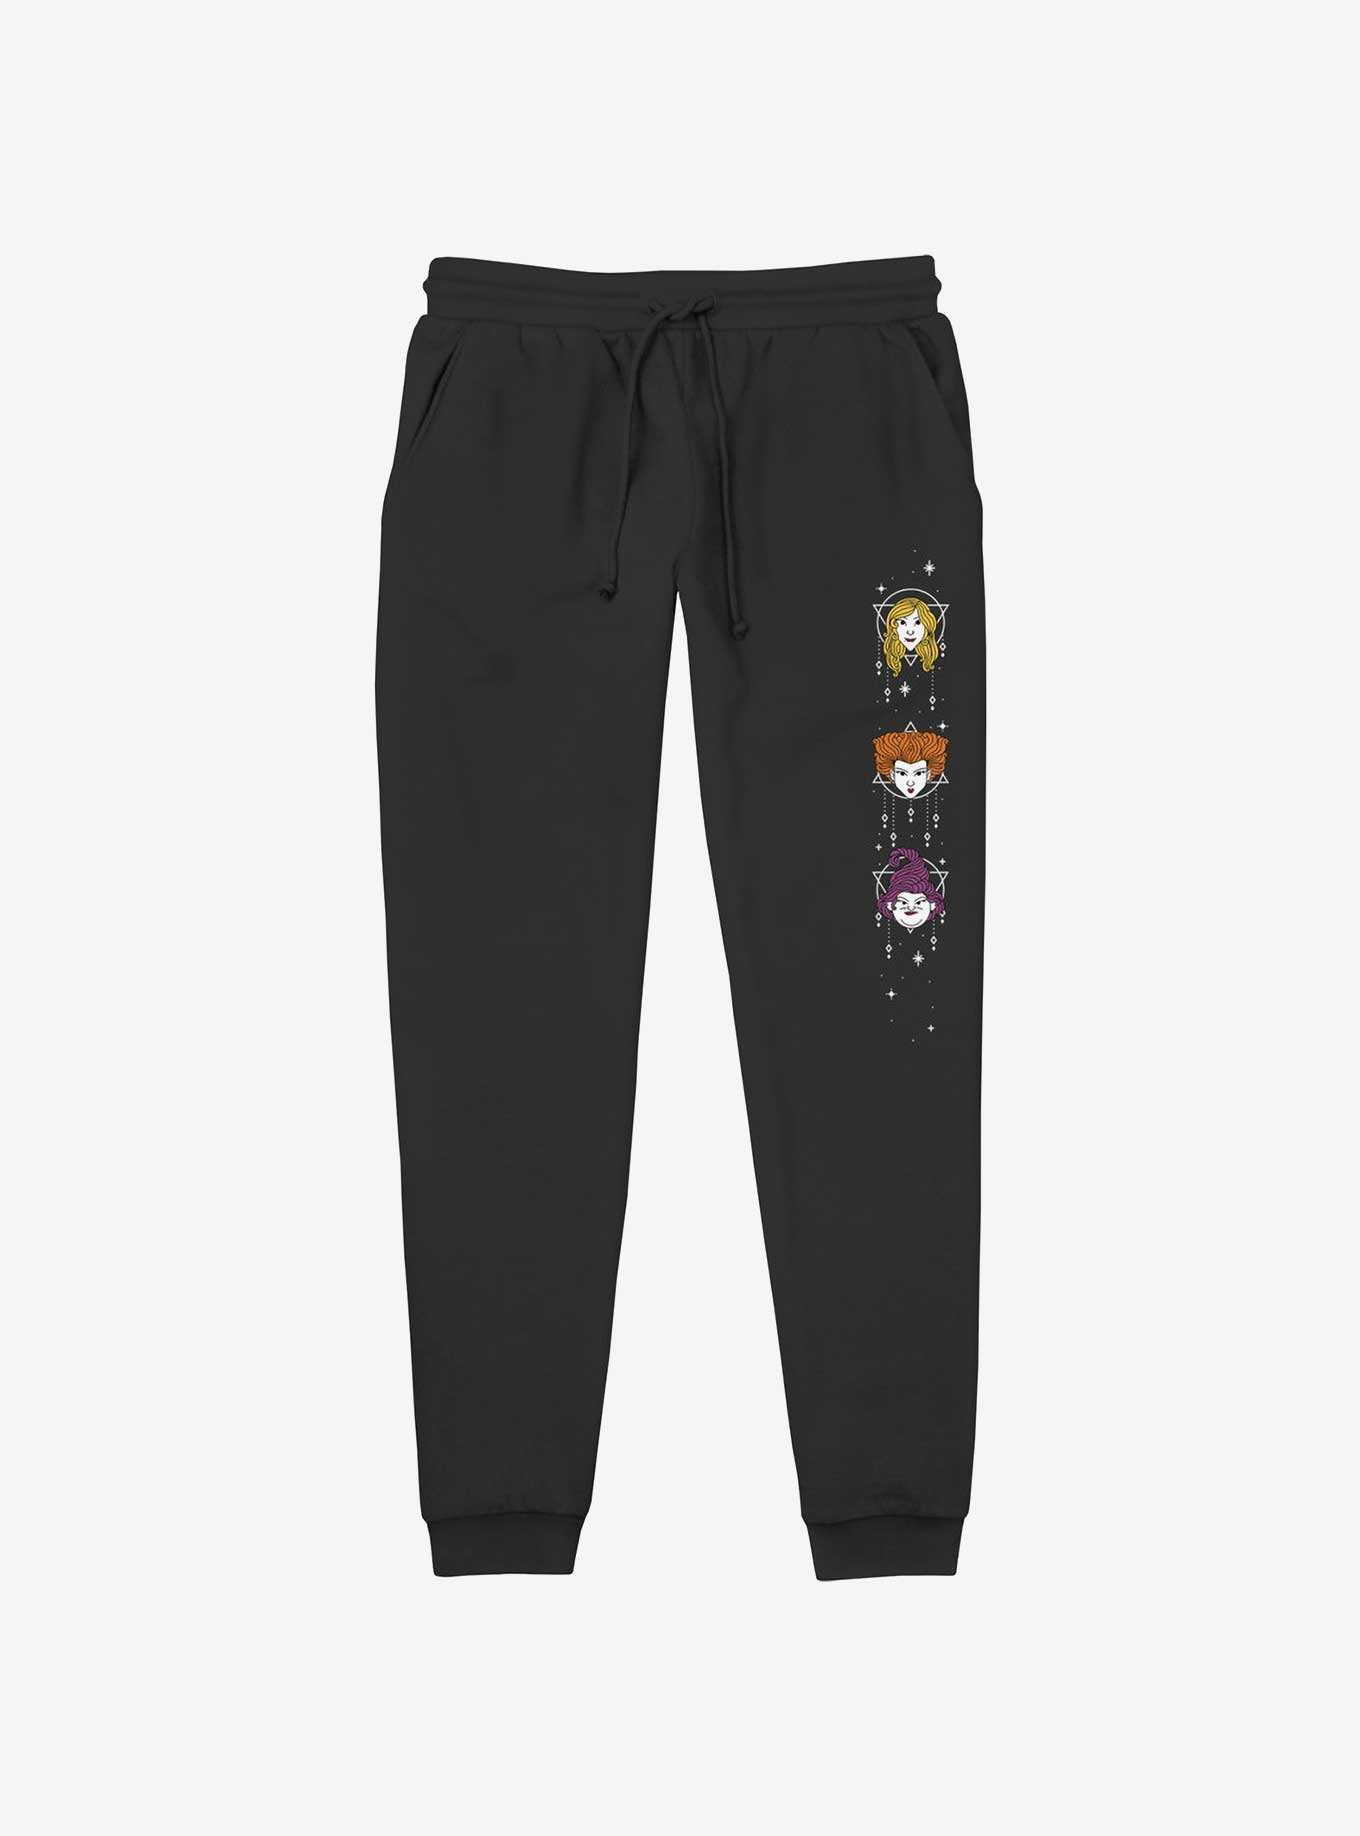 Boxlunch Disney Minnie Mouse Weekend Jogger Sweatpants